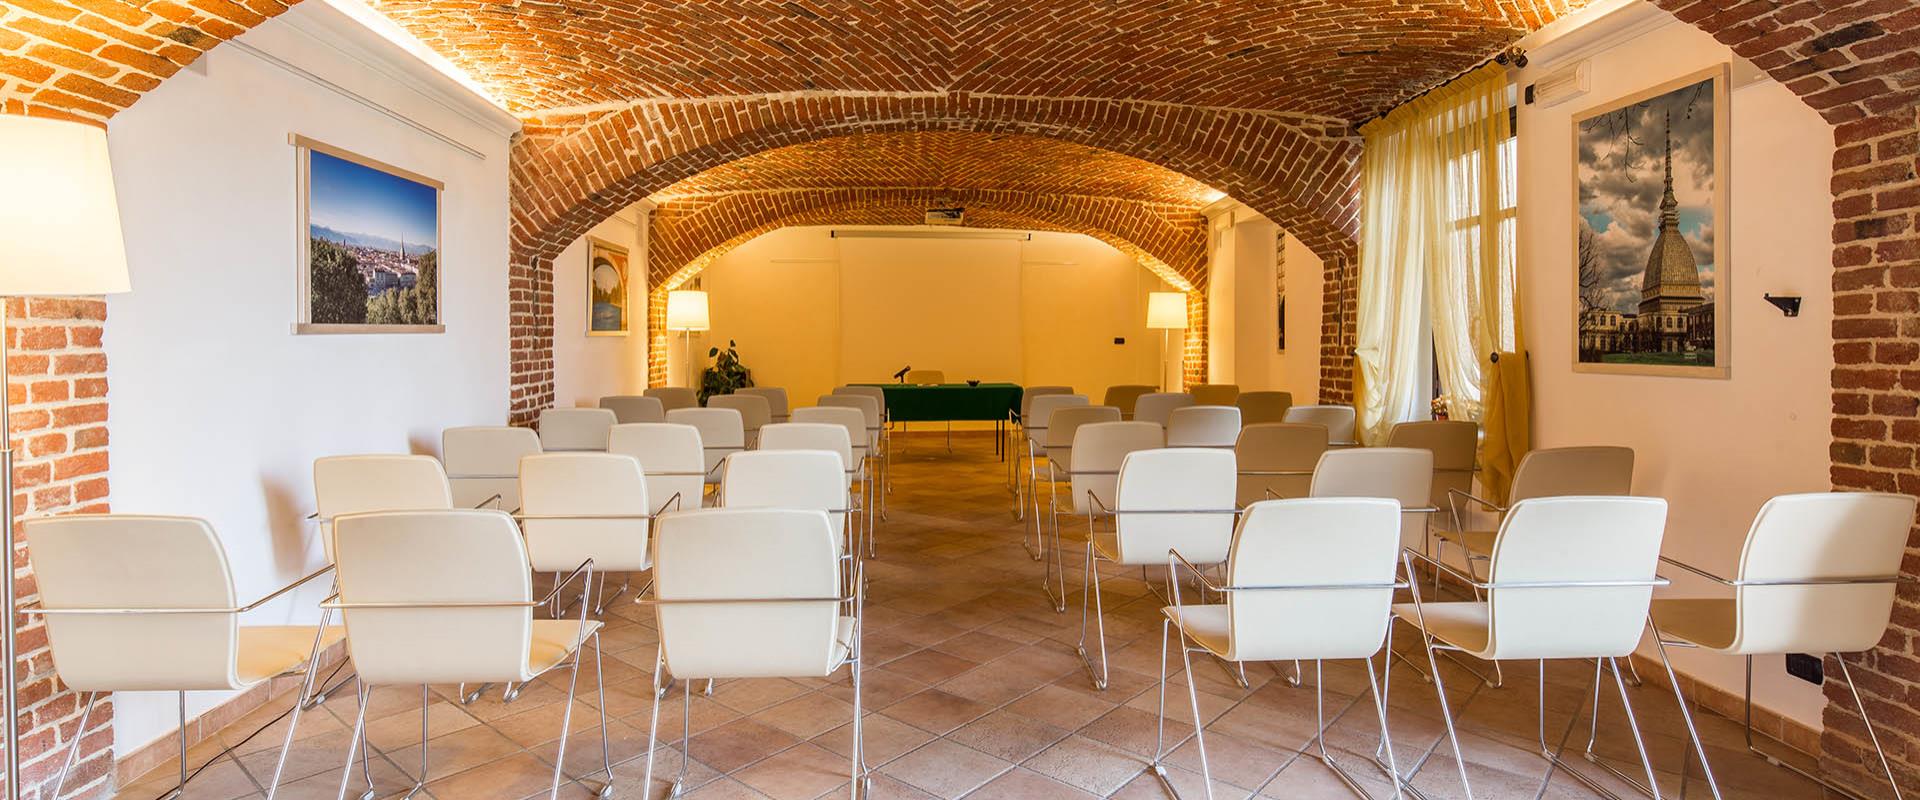 A meeting room exclusively for your events?  At 10 minutes from Turin airport, ... choose the Best Western Plus guarantee!